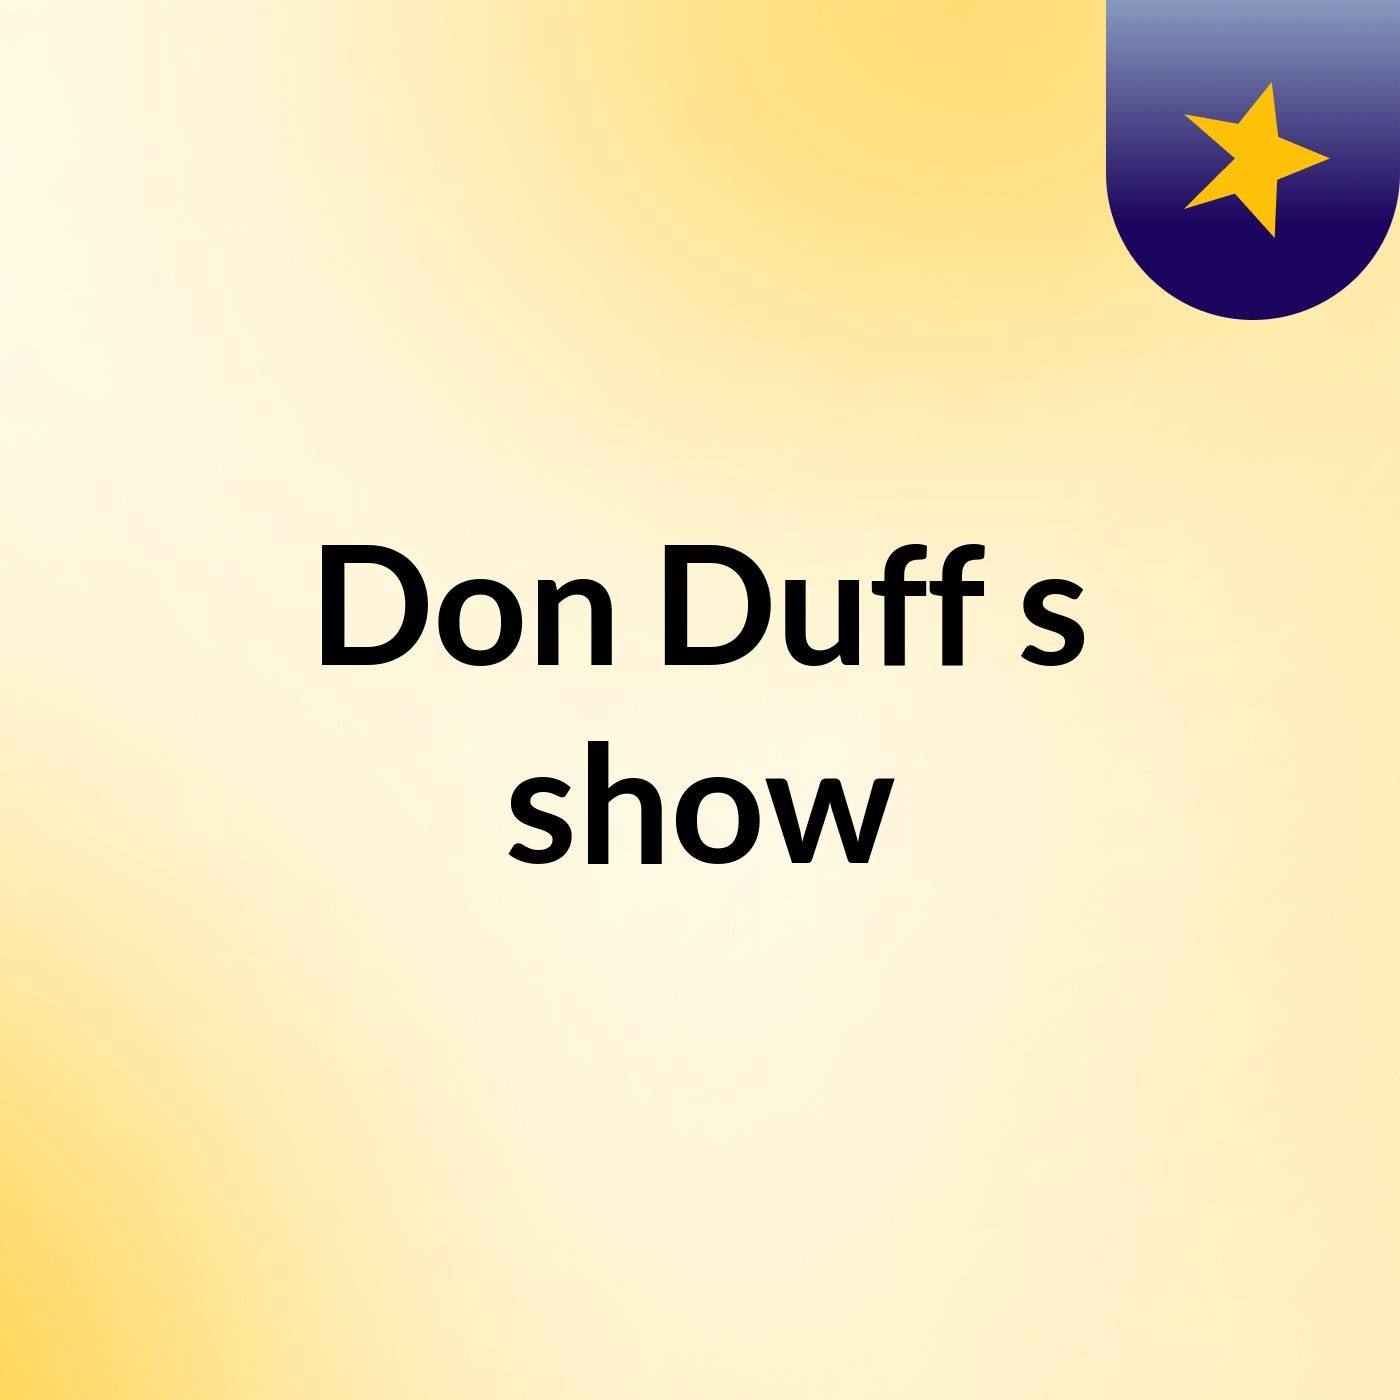 Don Duff's show